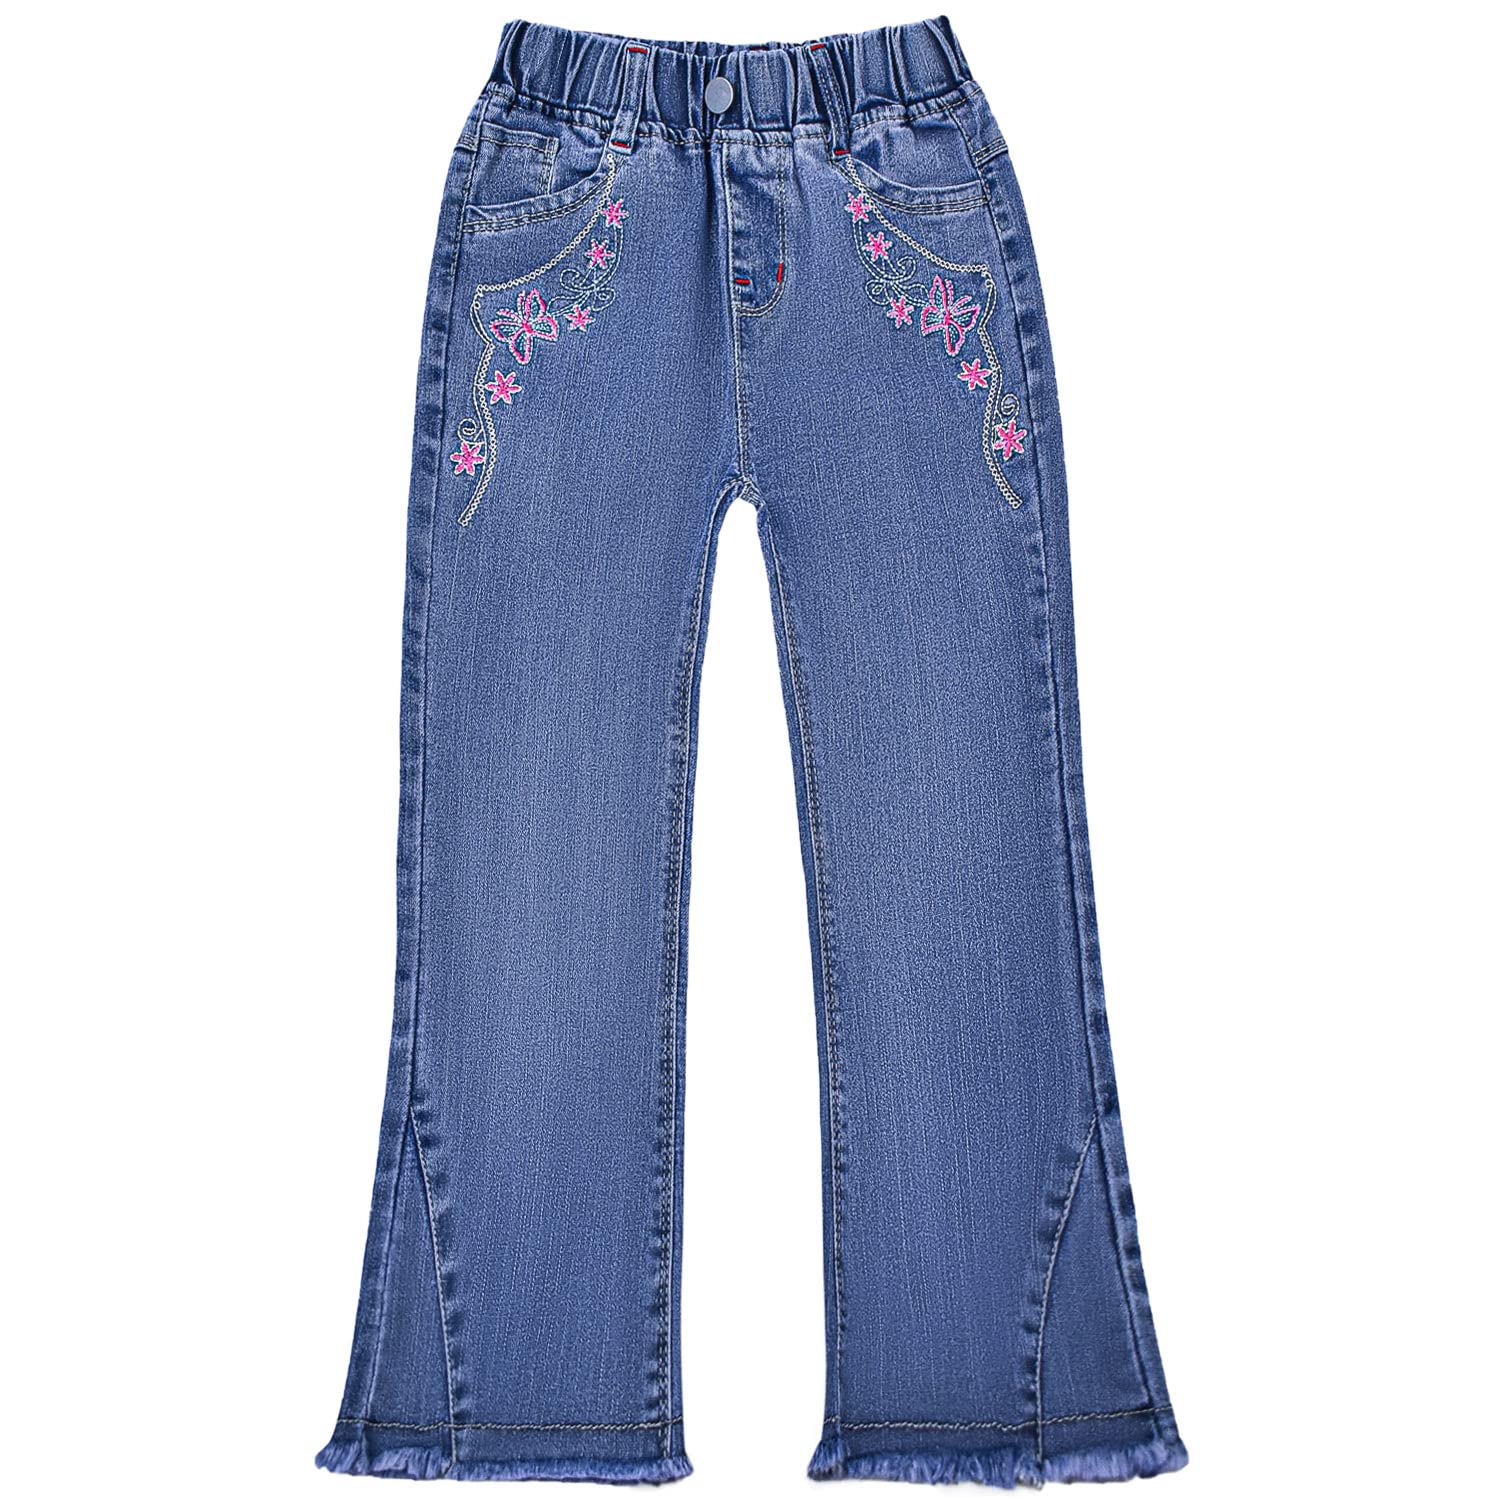 Peacolate 2-11T Toddler Little Girls Distressed Embroidered Jeans Denim Pants